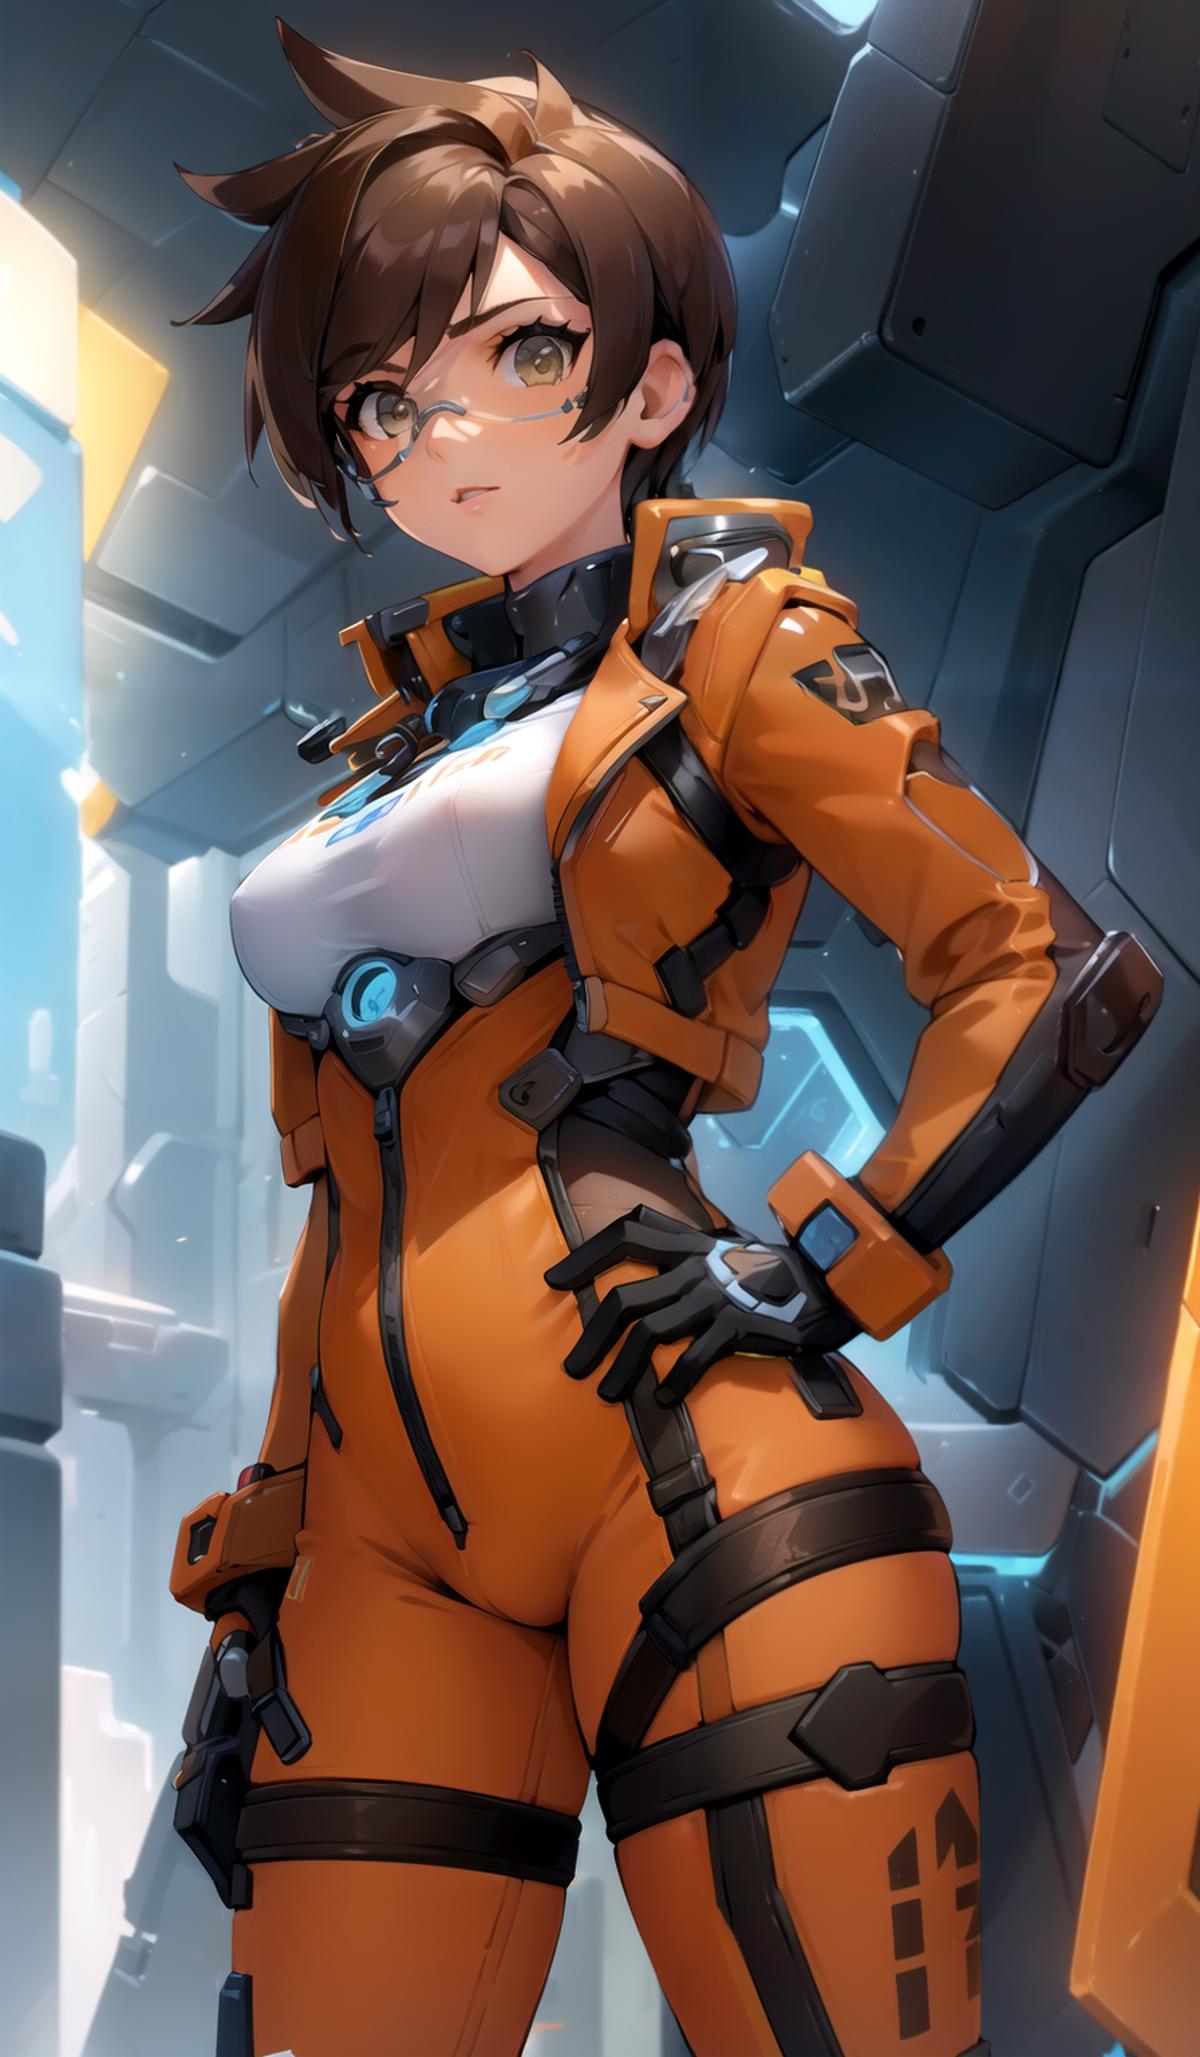 Not so Perfect - Tracer from Overwatch image by Legendaer